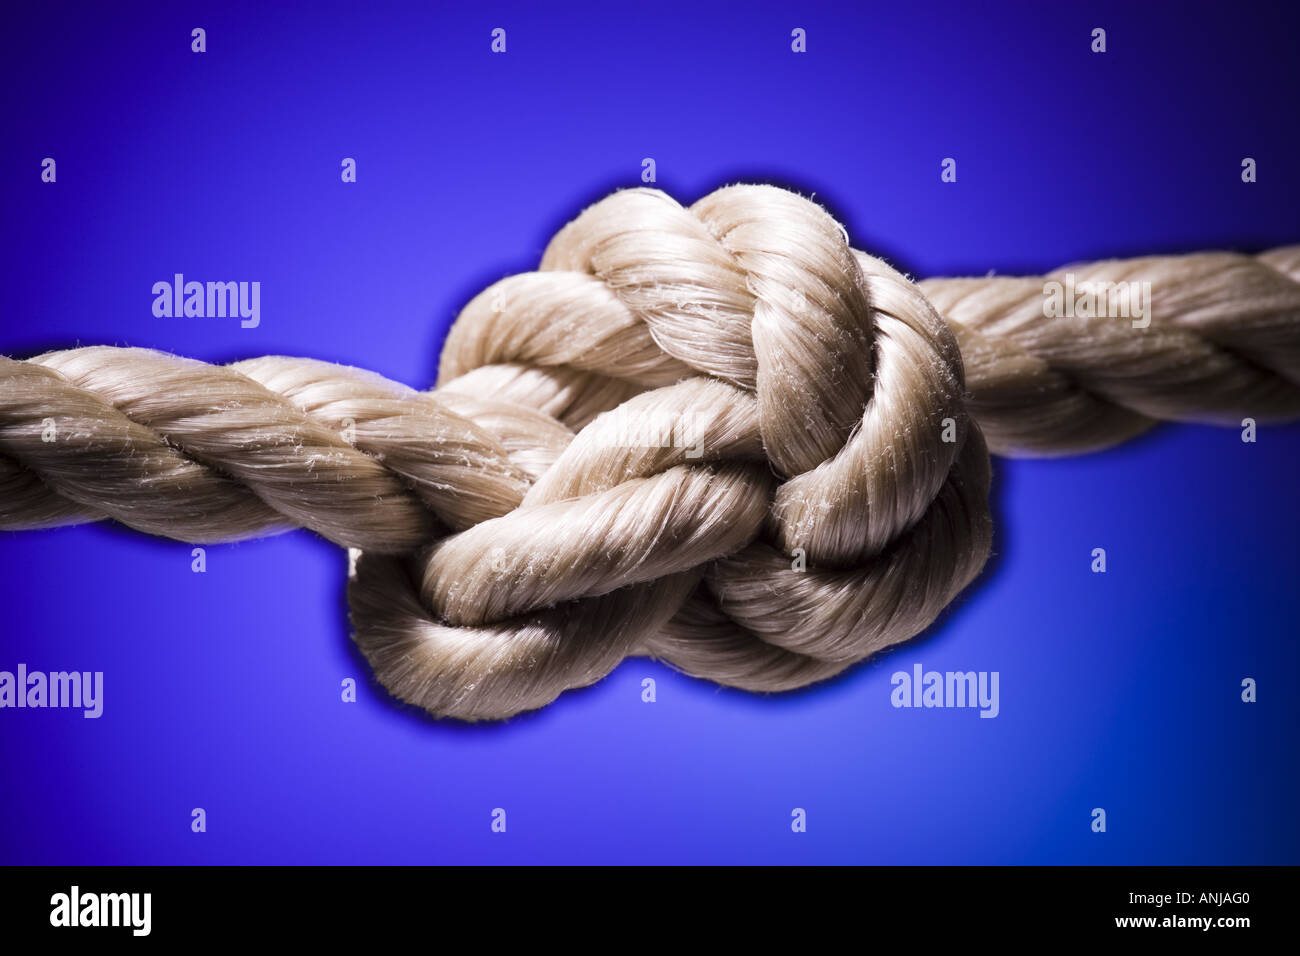 Close up of a tied knot on a rope Stock Photo